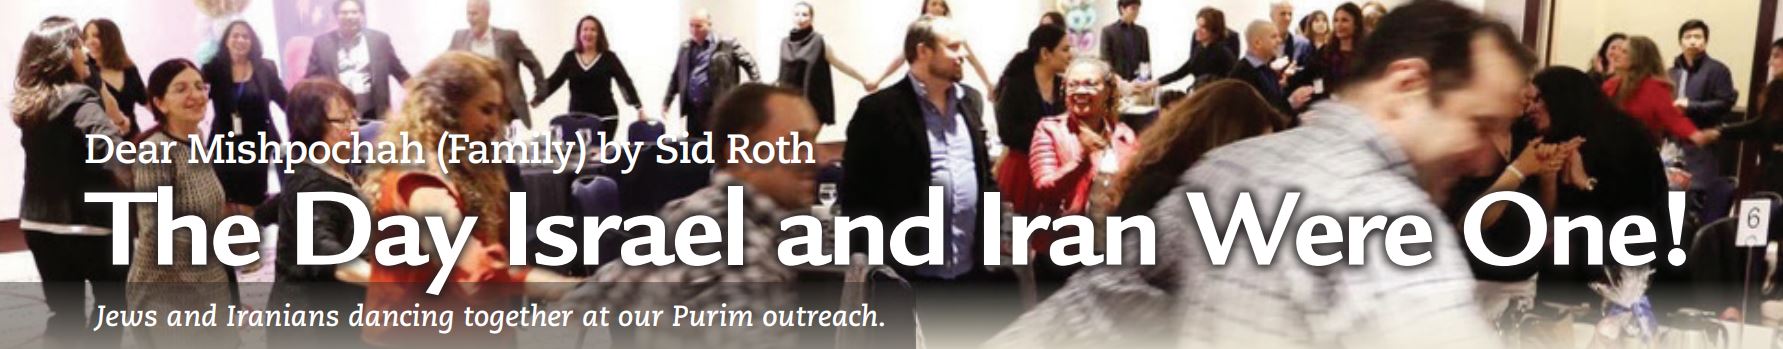 The Day Israel and Iran Were One During a Purim Outreach